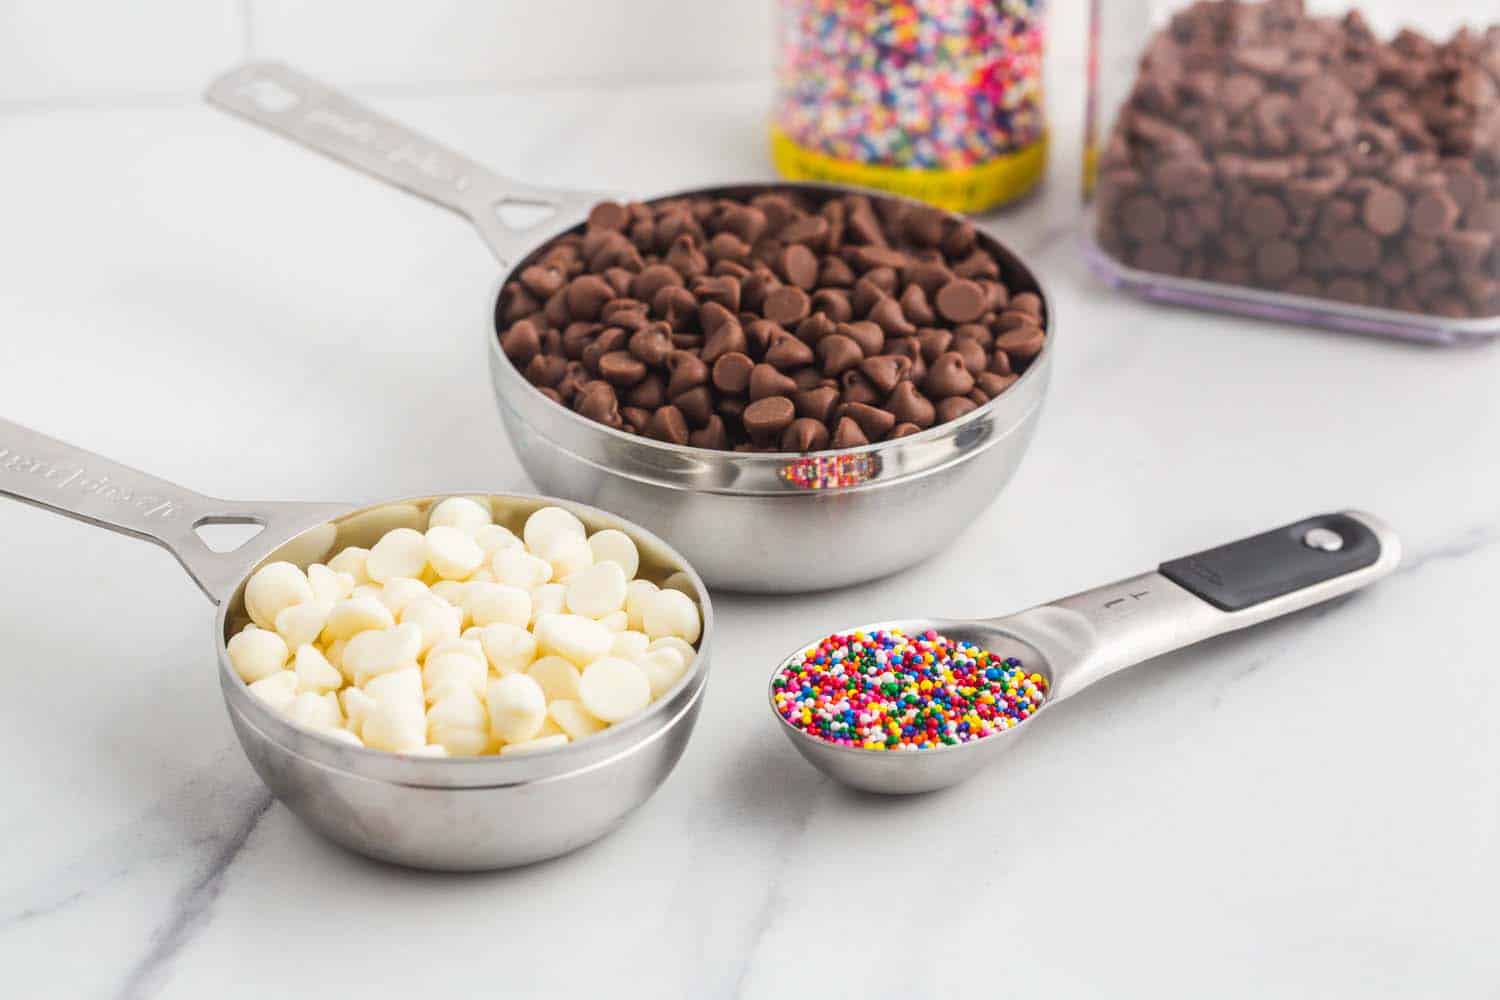 chocolate chips and sprinkles measured out in measuring cups and spoons